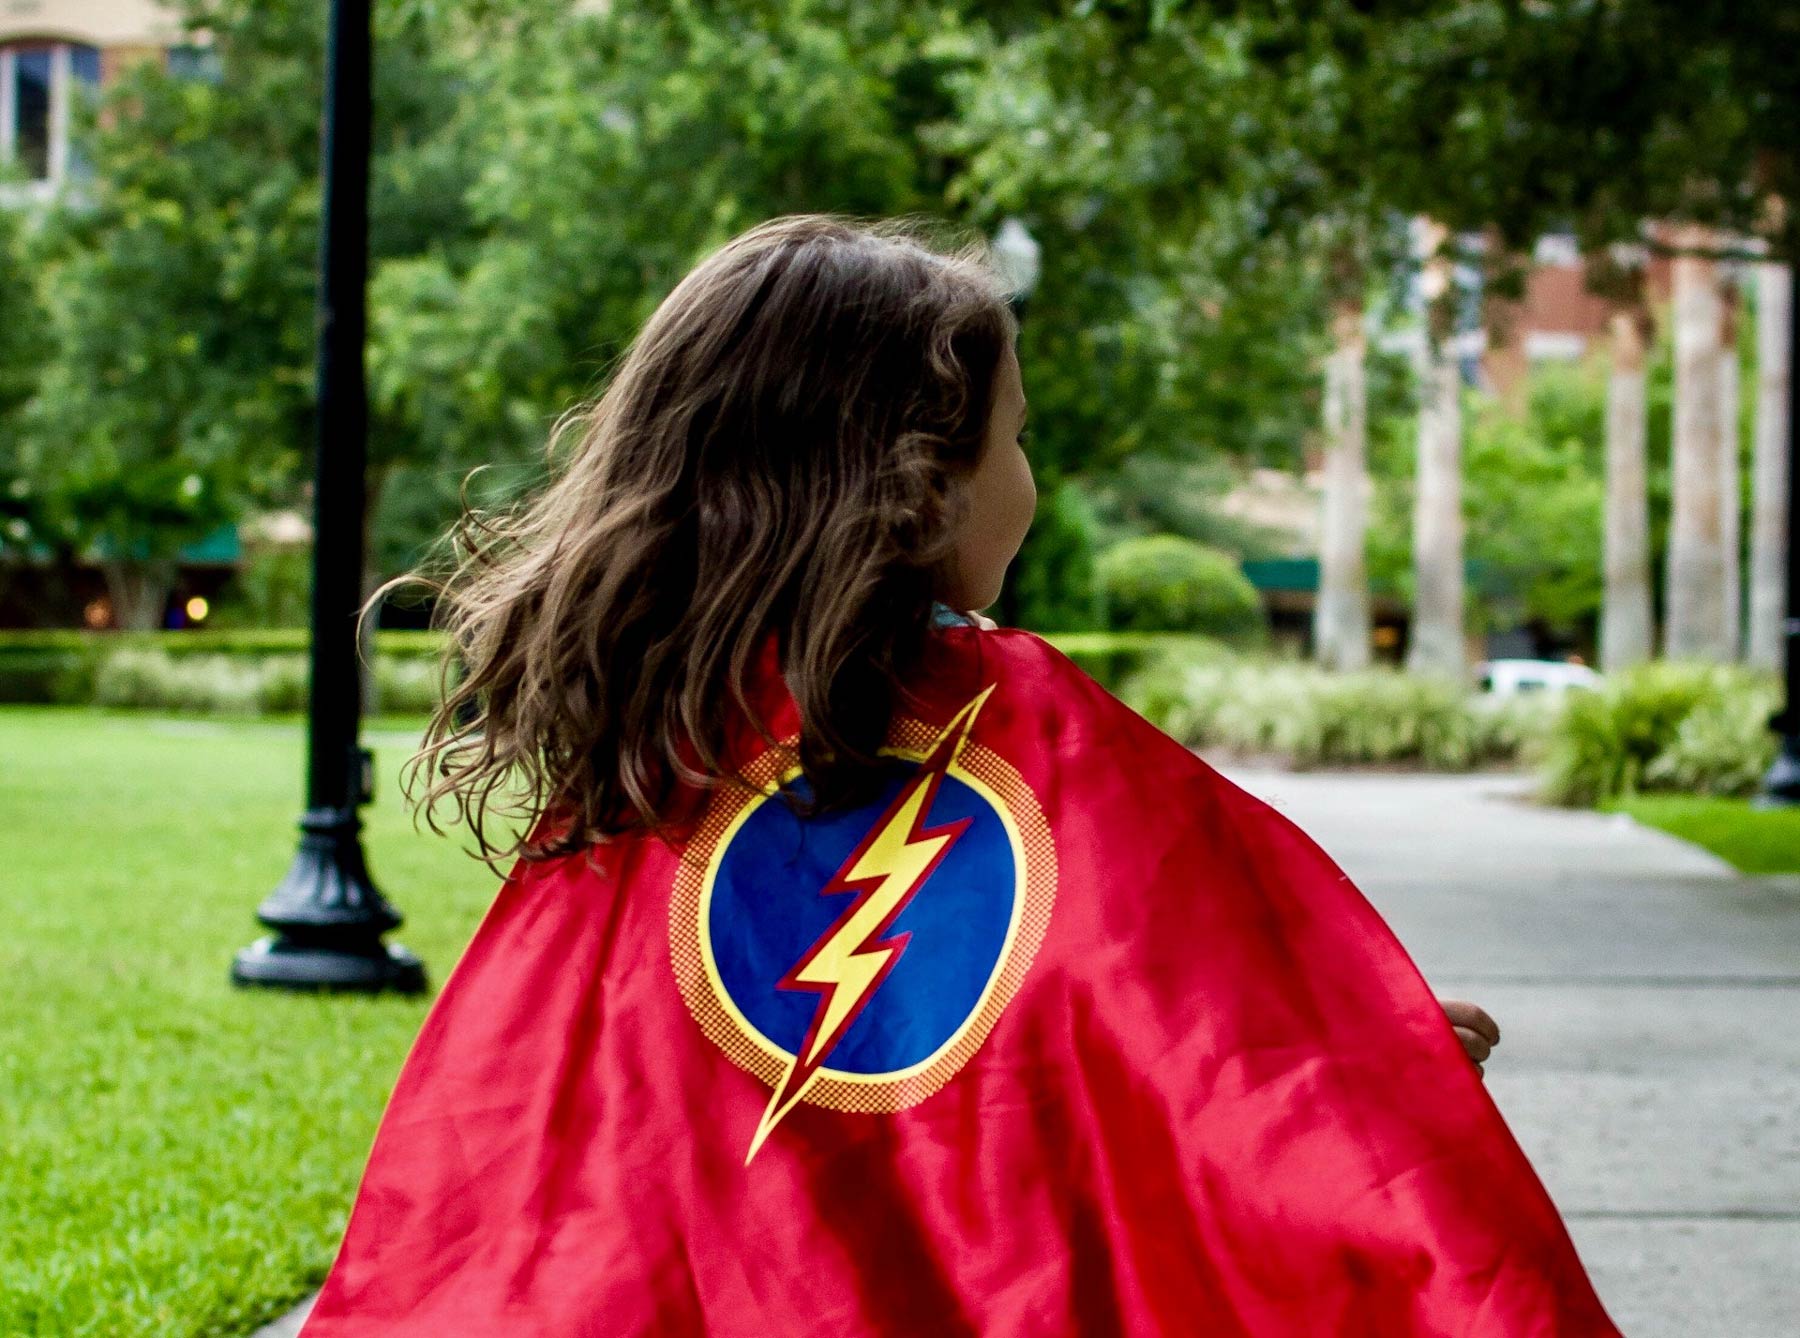 A Superhero therapy tool kit to help your children cope with difficult situations